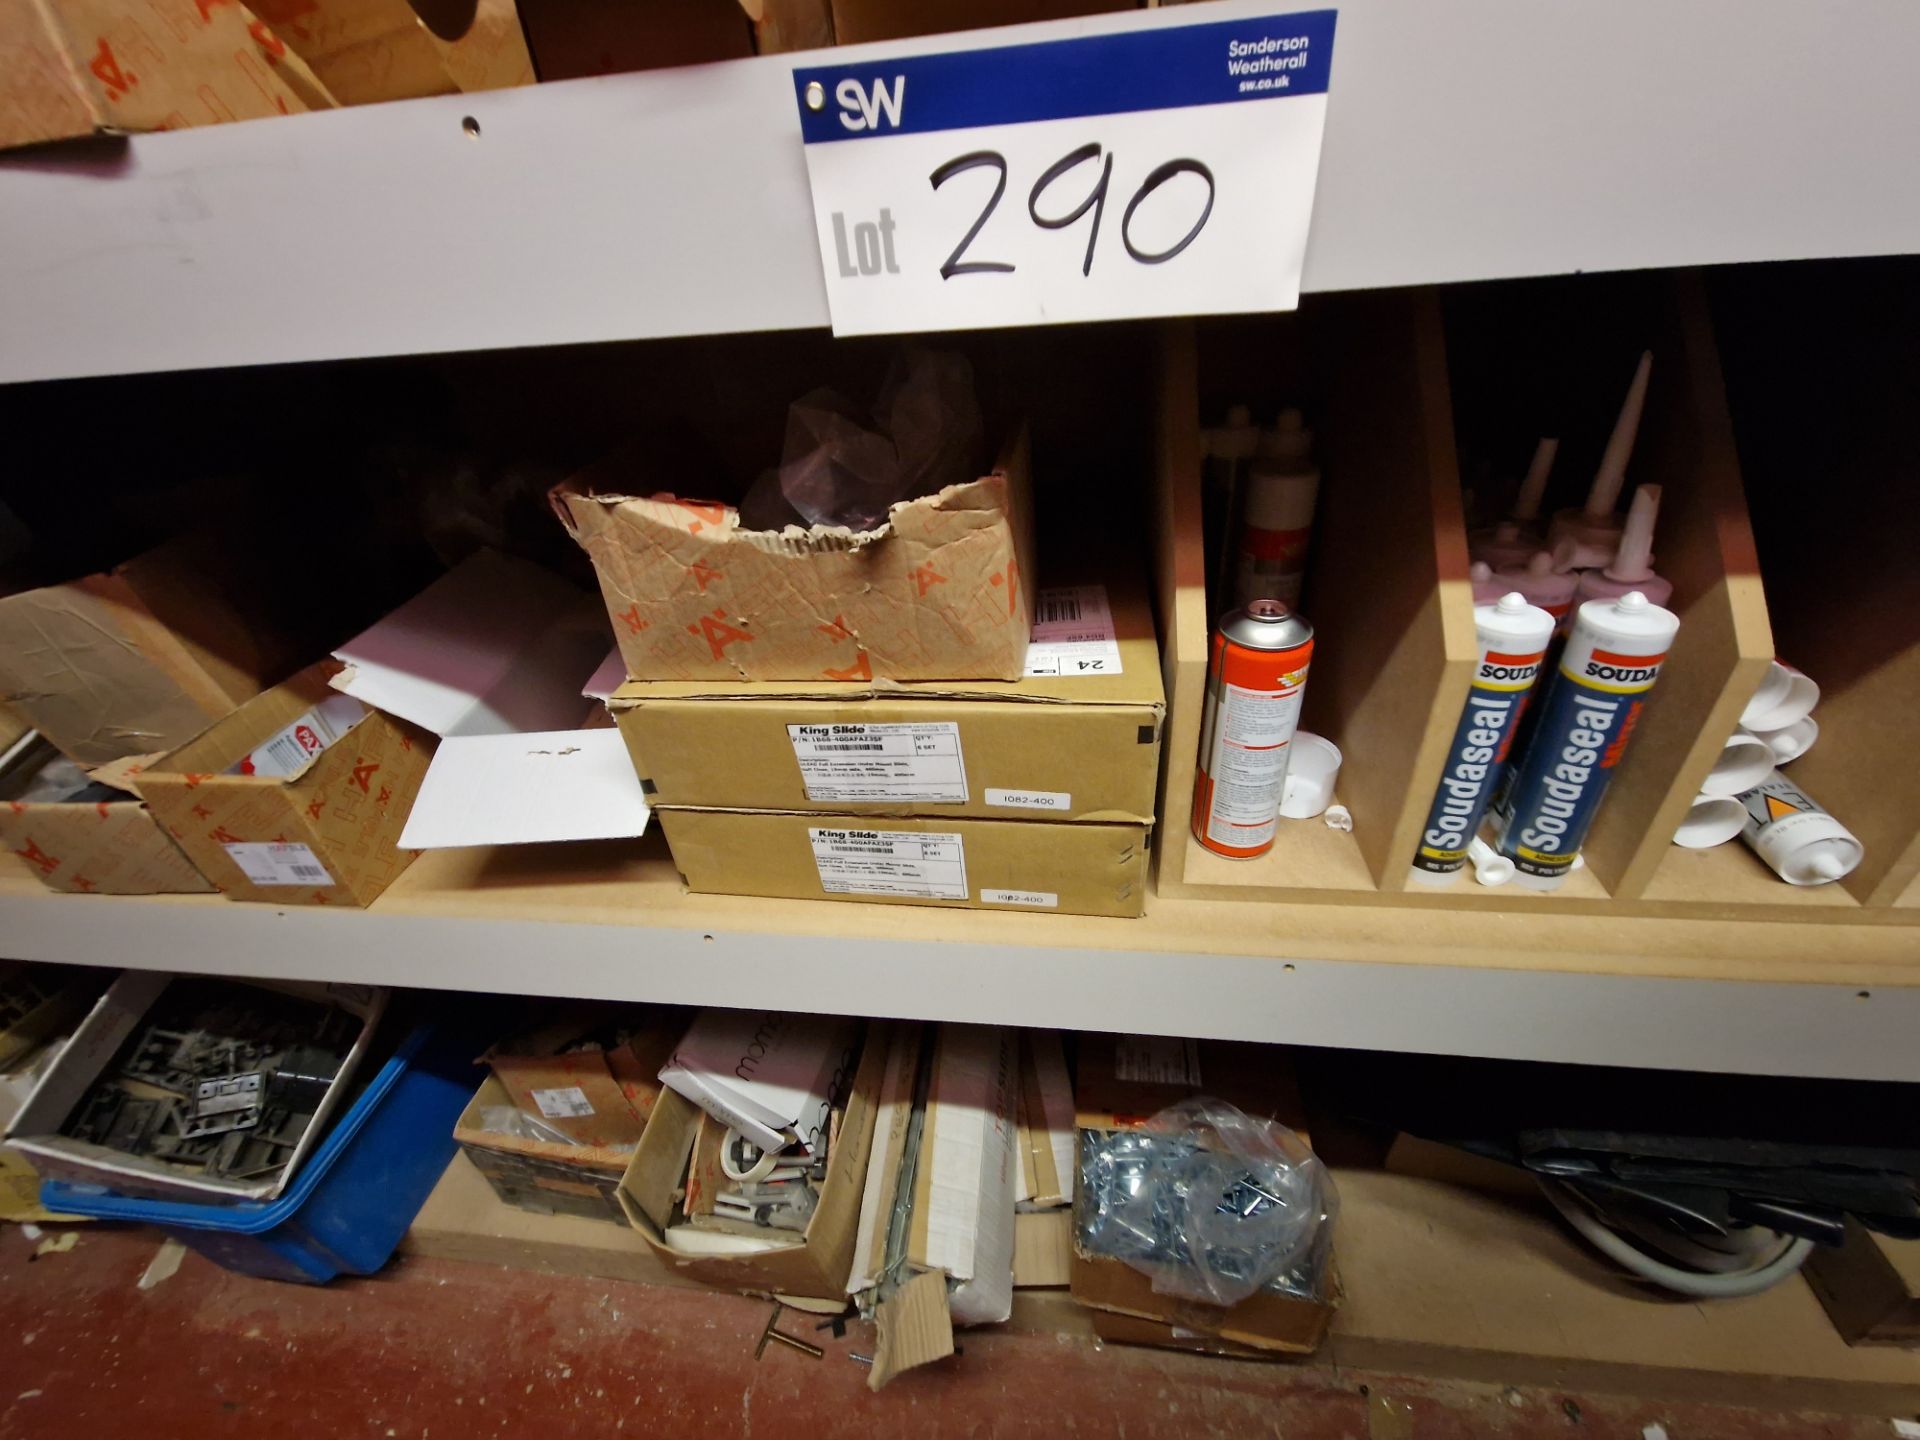 Contents to One Bay of Racking, including Fixtures, Fittings, Bolts, Drawer Runners, Bar Legs, - Image 11 of 32